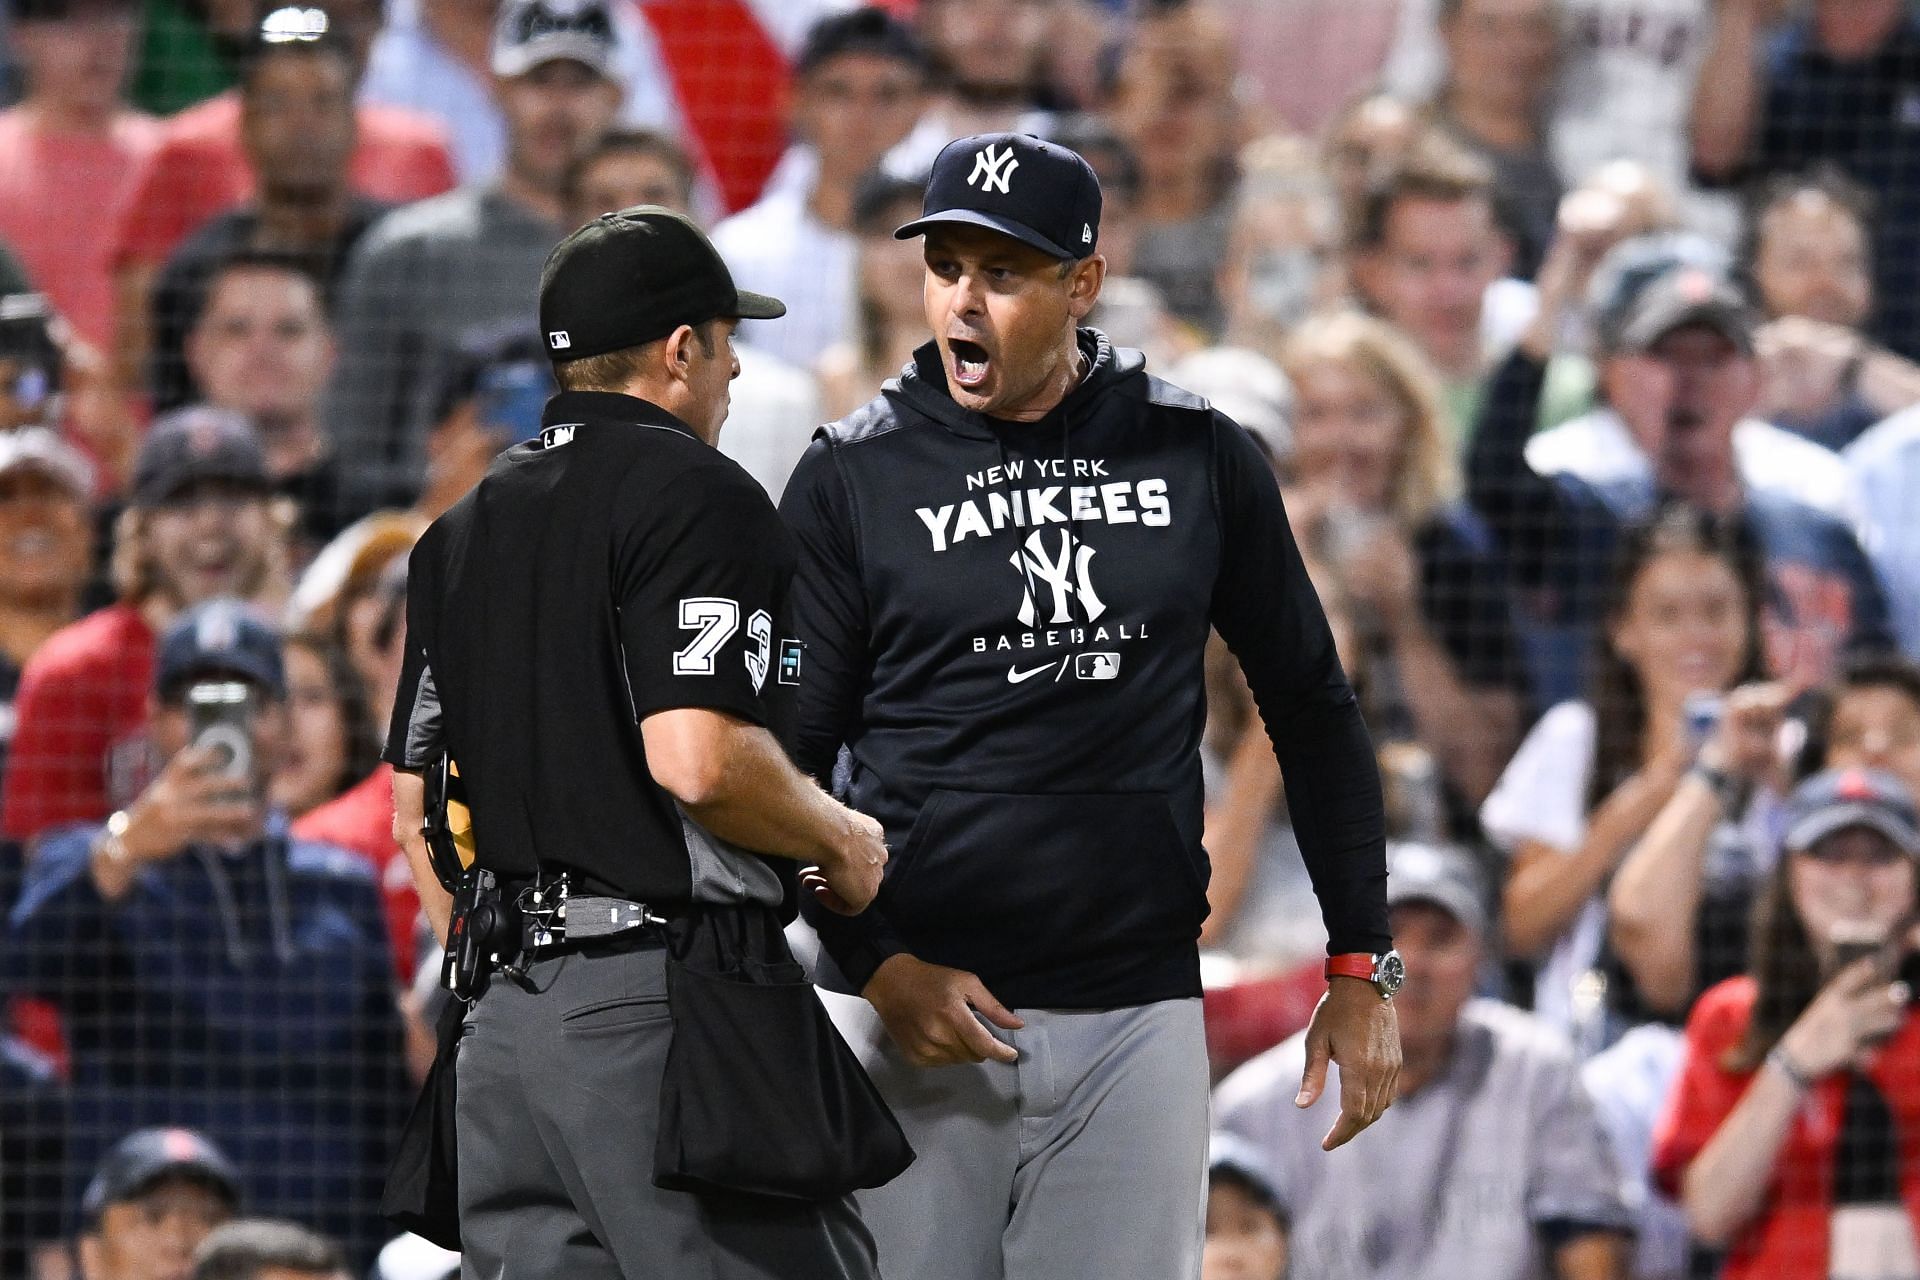 Yankees' Boone embarrassed by his theatrical display in argument